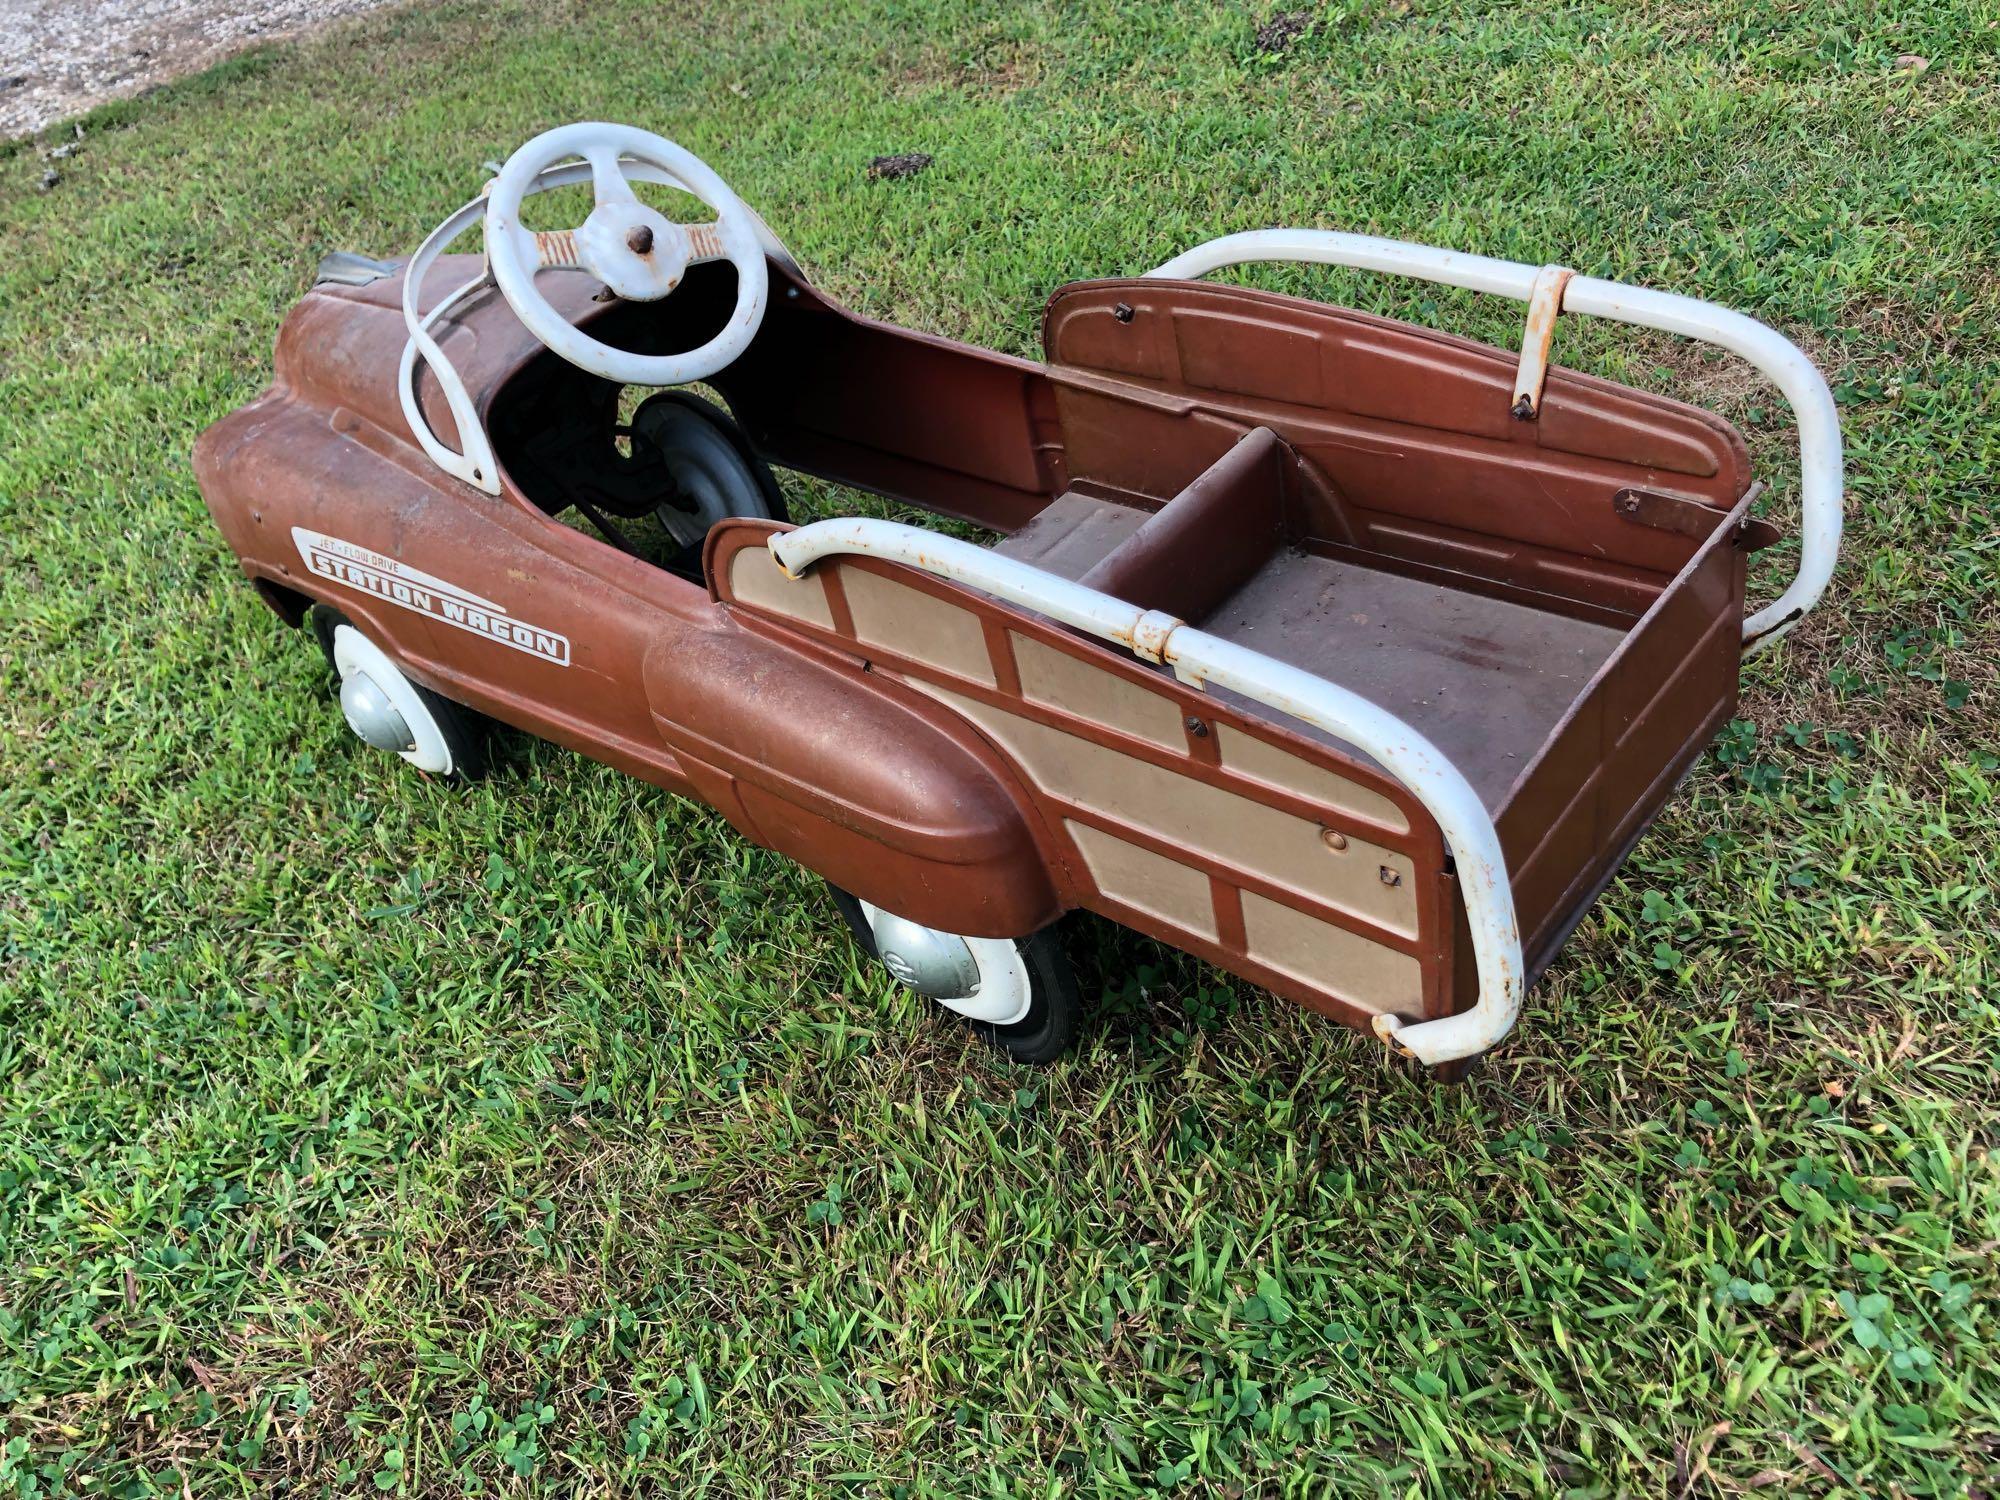 Metal Jet-Flow Drive station wagon pedal-car, w/rear seat & storage compartment. Complete w/pedals,